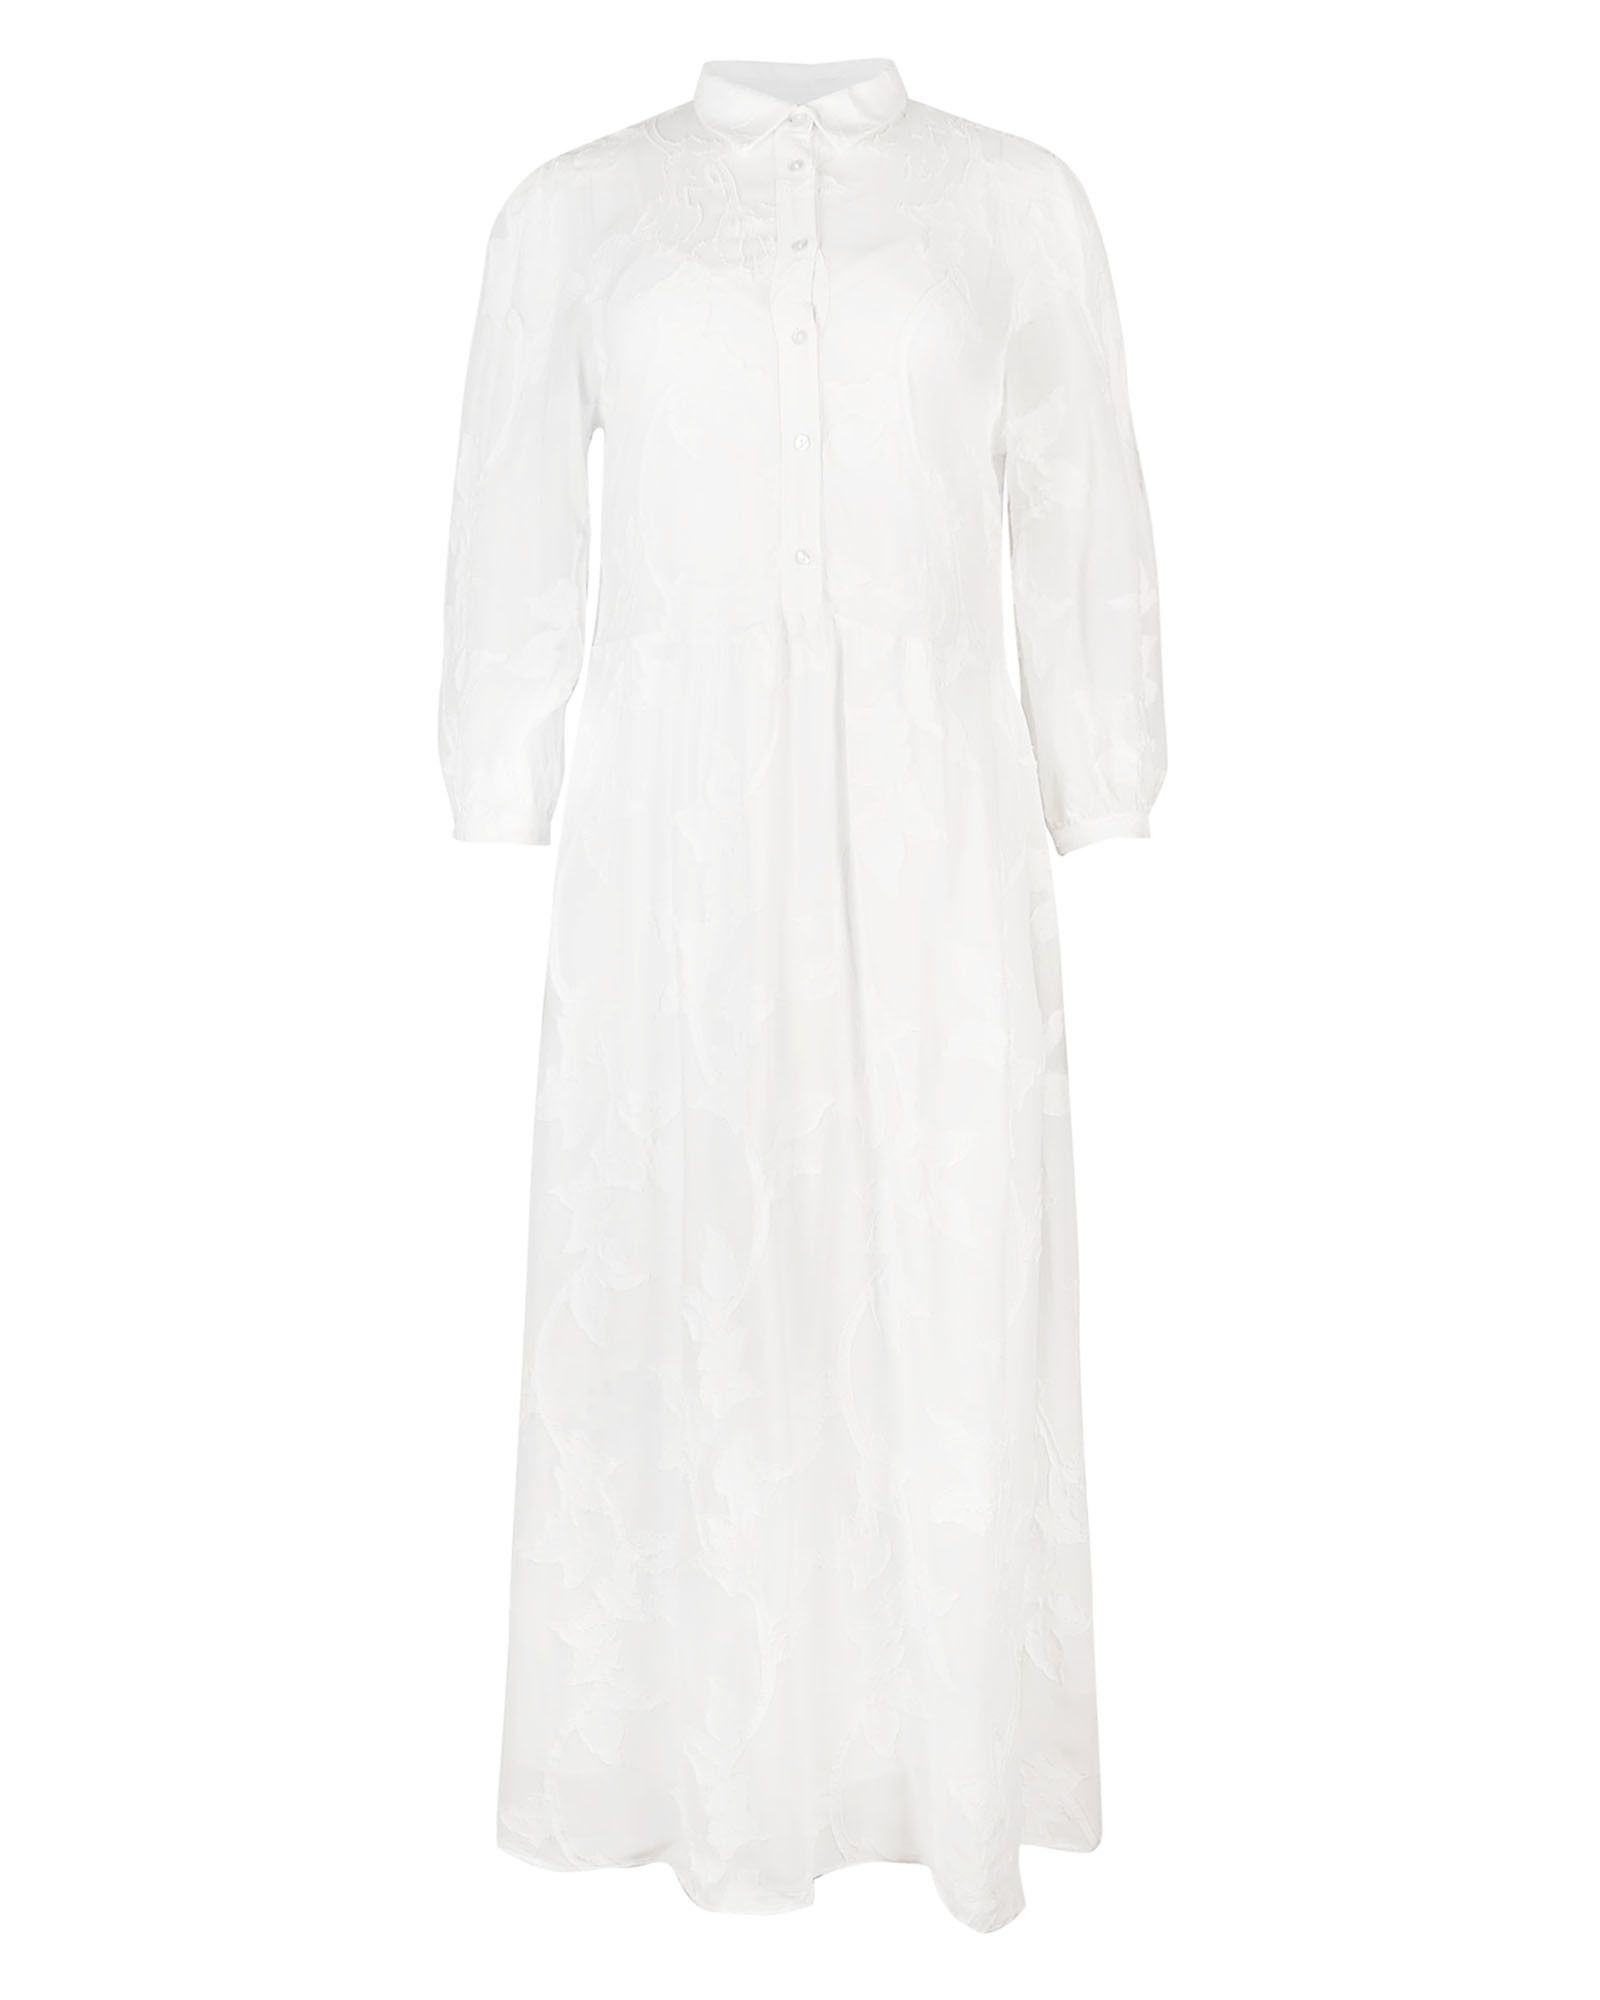 Buy > white maxi shirt dress with sleeves > in stock